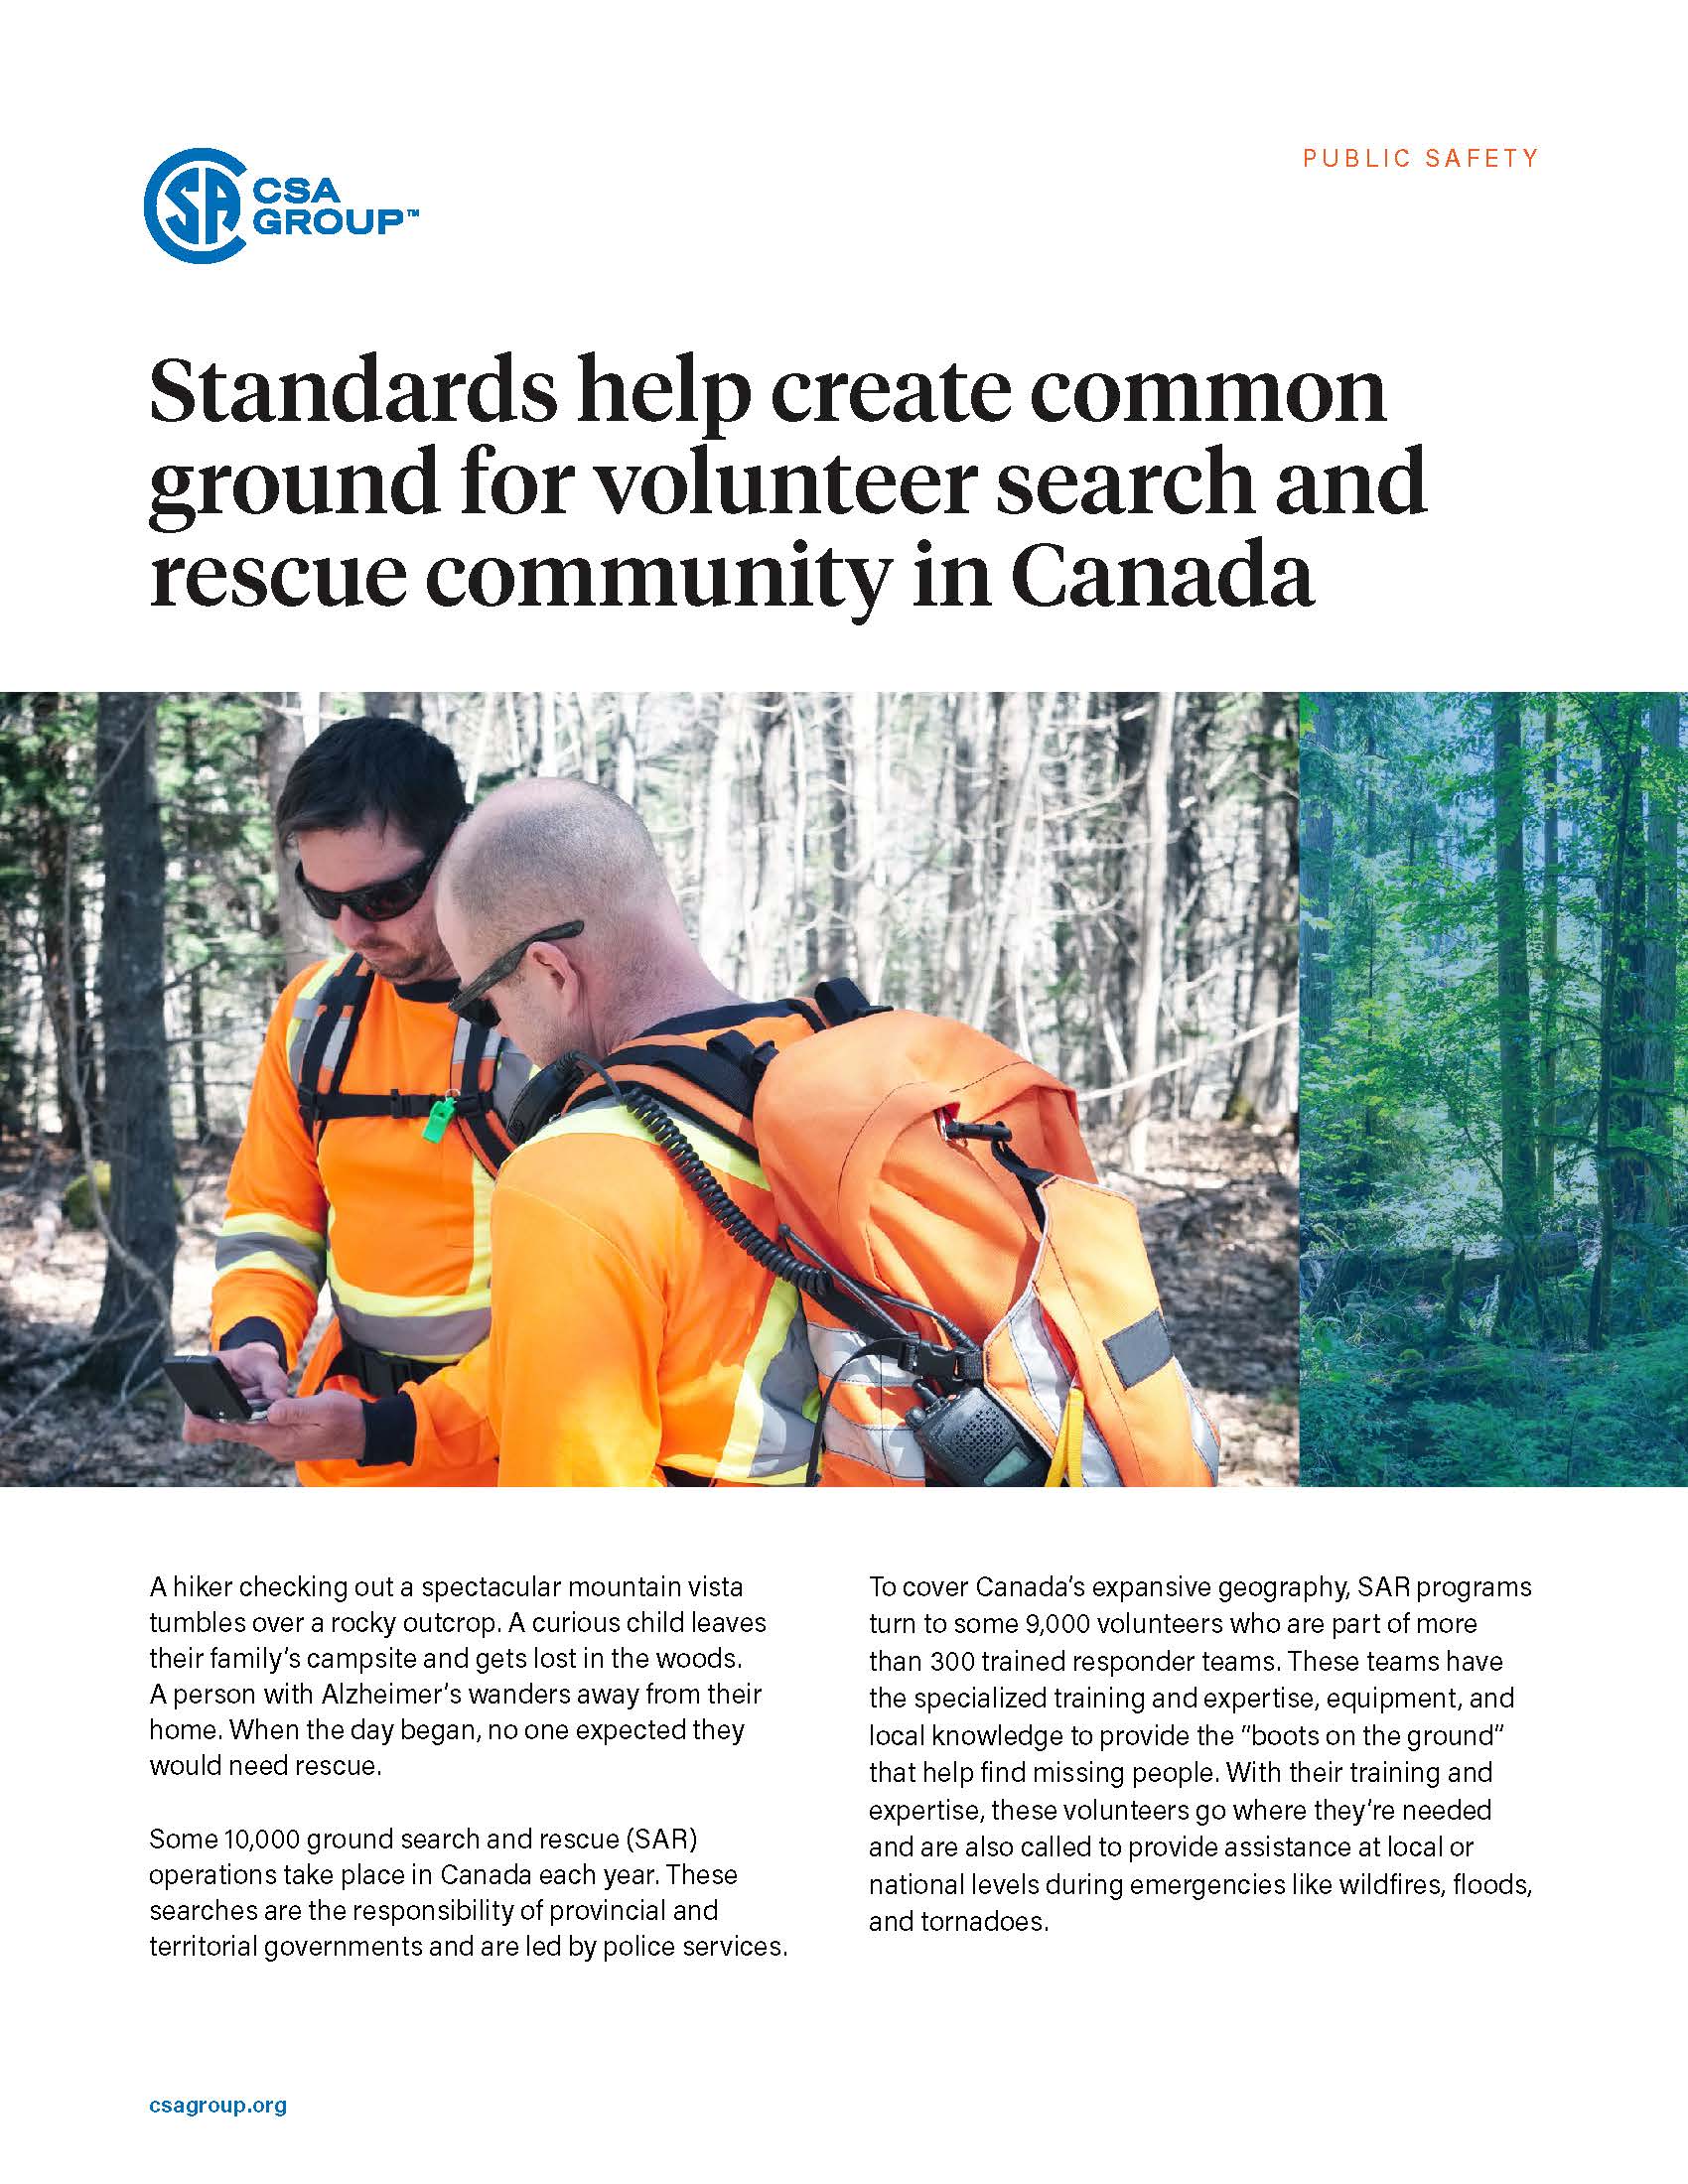 L'image sélectionnée. Standards help create common ground for volunteer search and rescue community in Canada